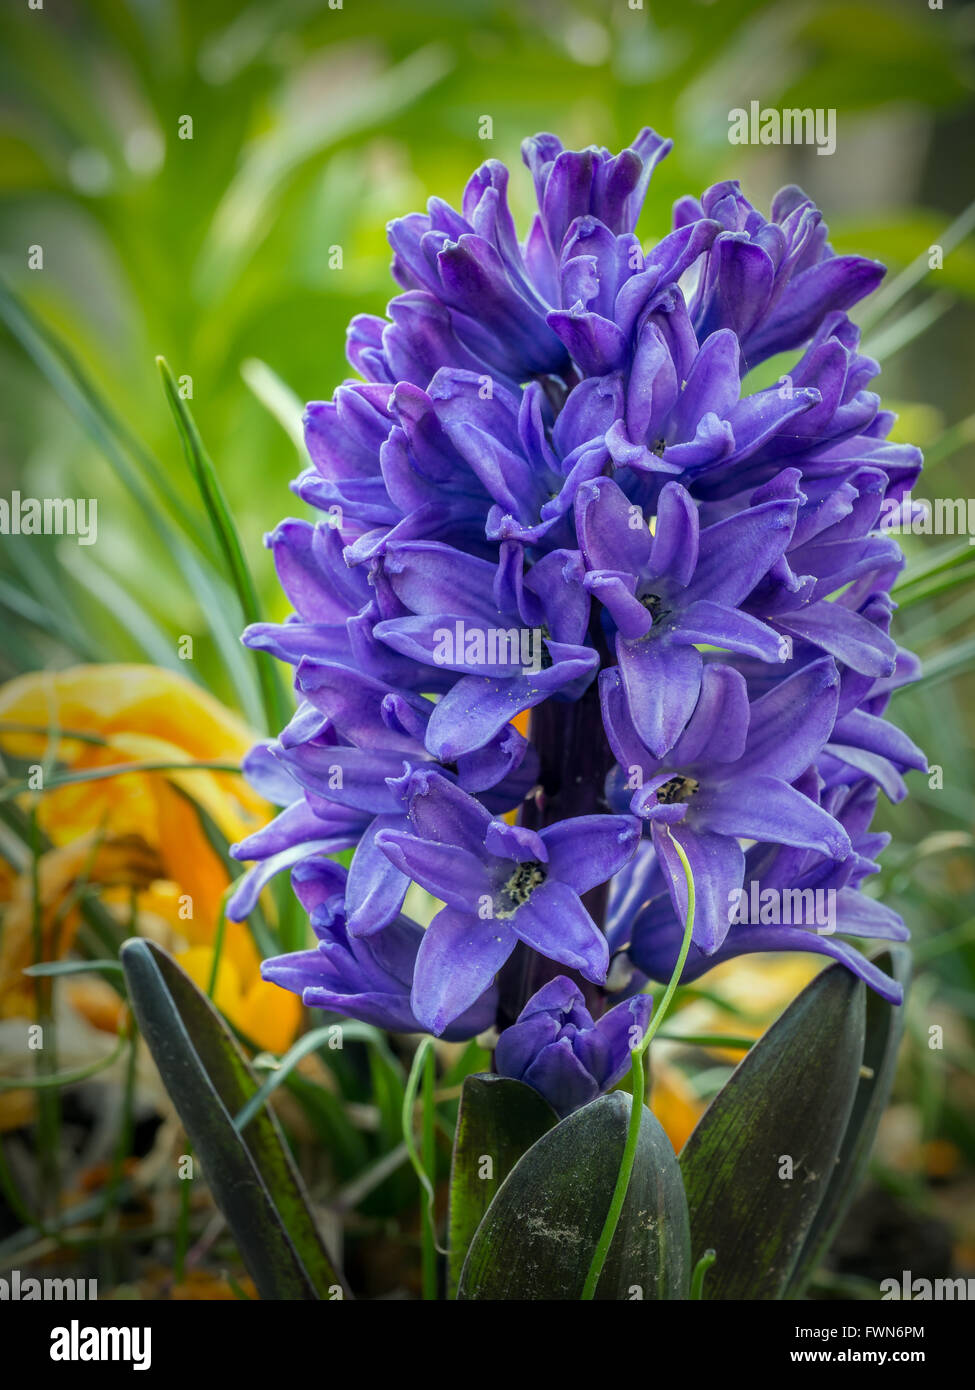 Violet hyacinth in blossom growing in the garden Stock Photo